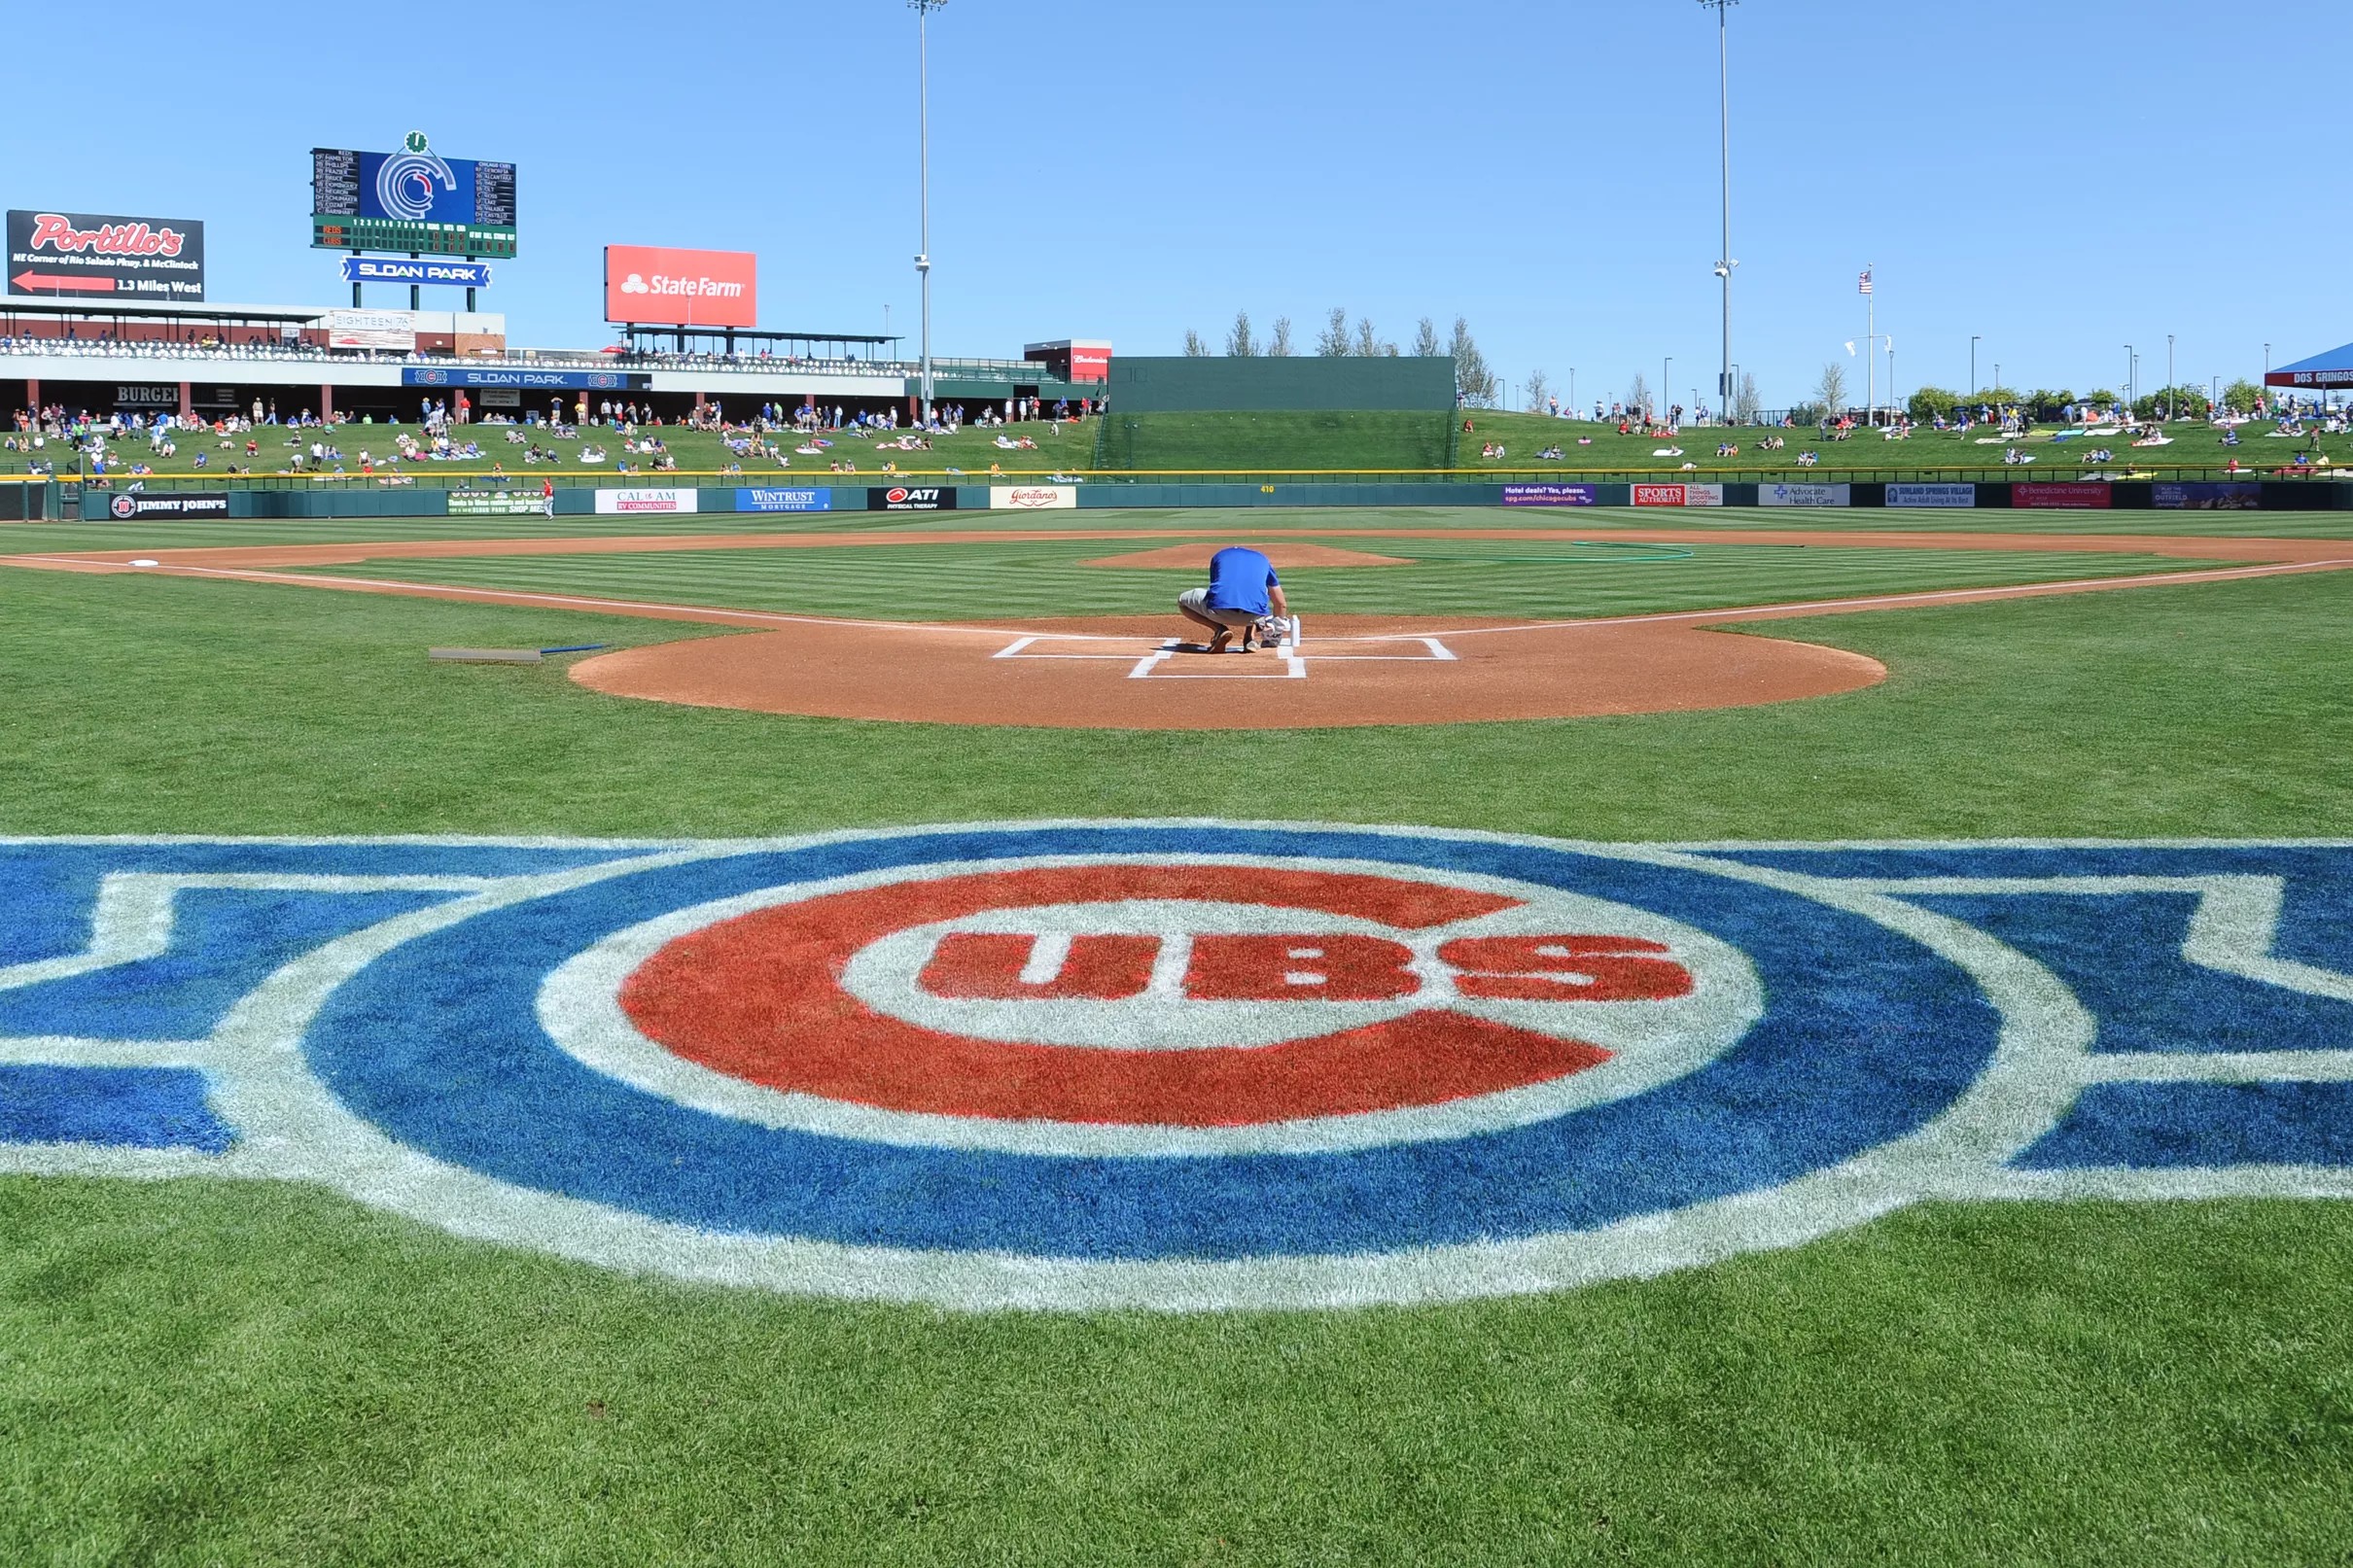 Cubs spring training tickets on sale Saturday